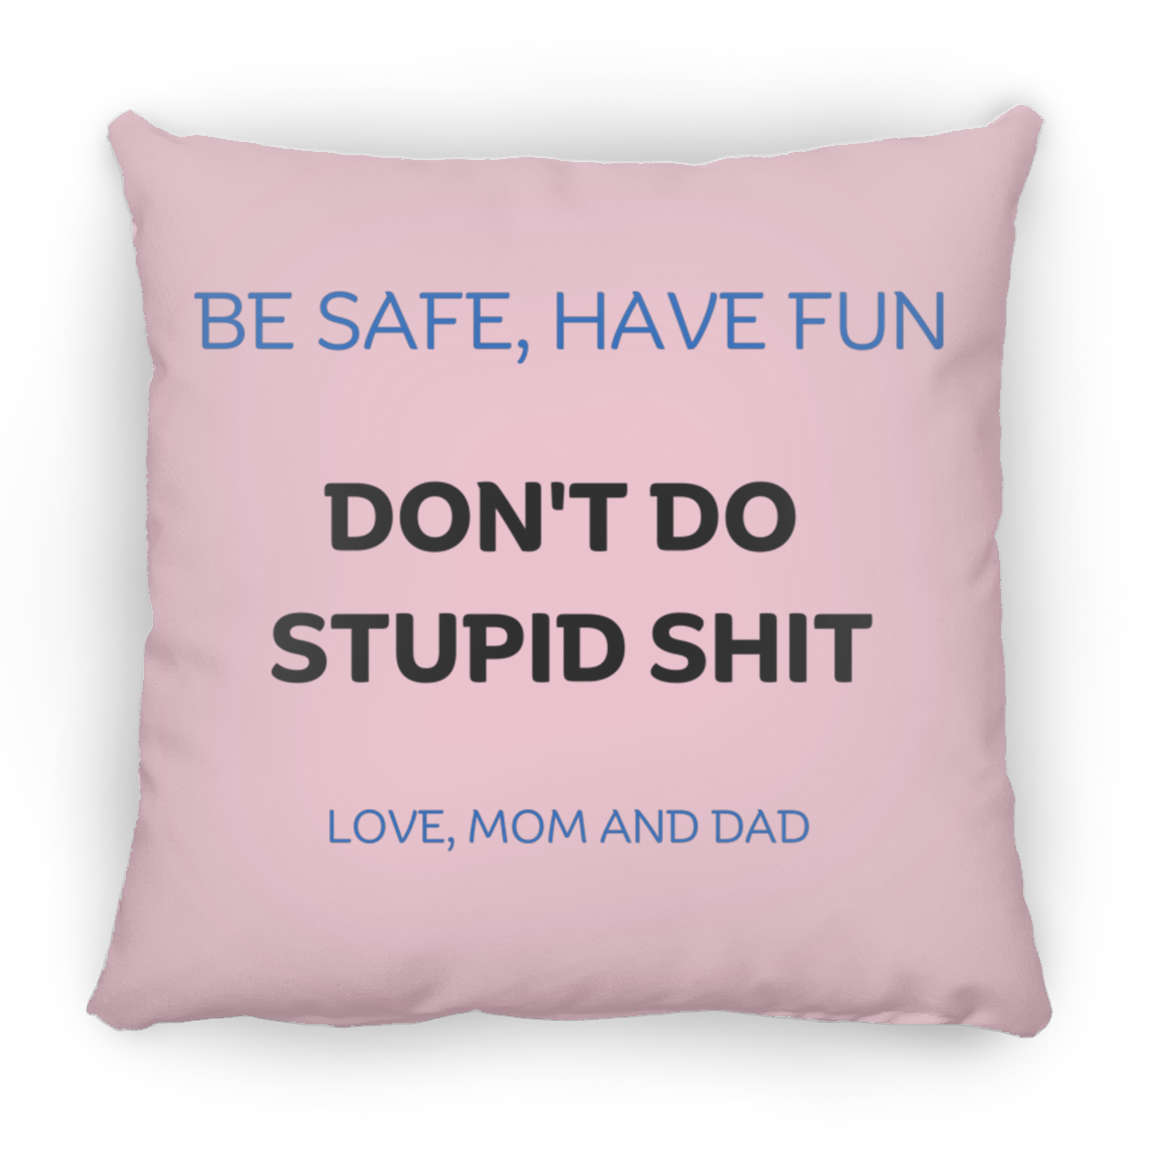 Get trendy with BE SAFE  Large Square Pillow - Housewares available at Good Gift Company. Grab yours for $25.36 today!